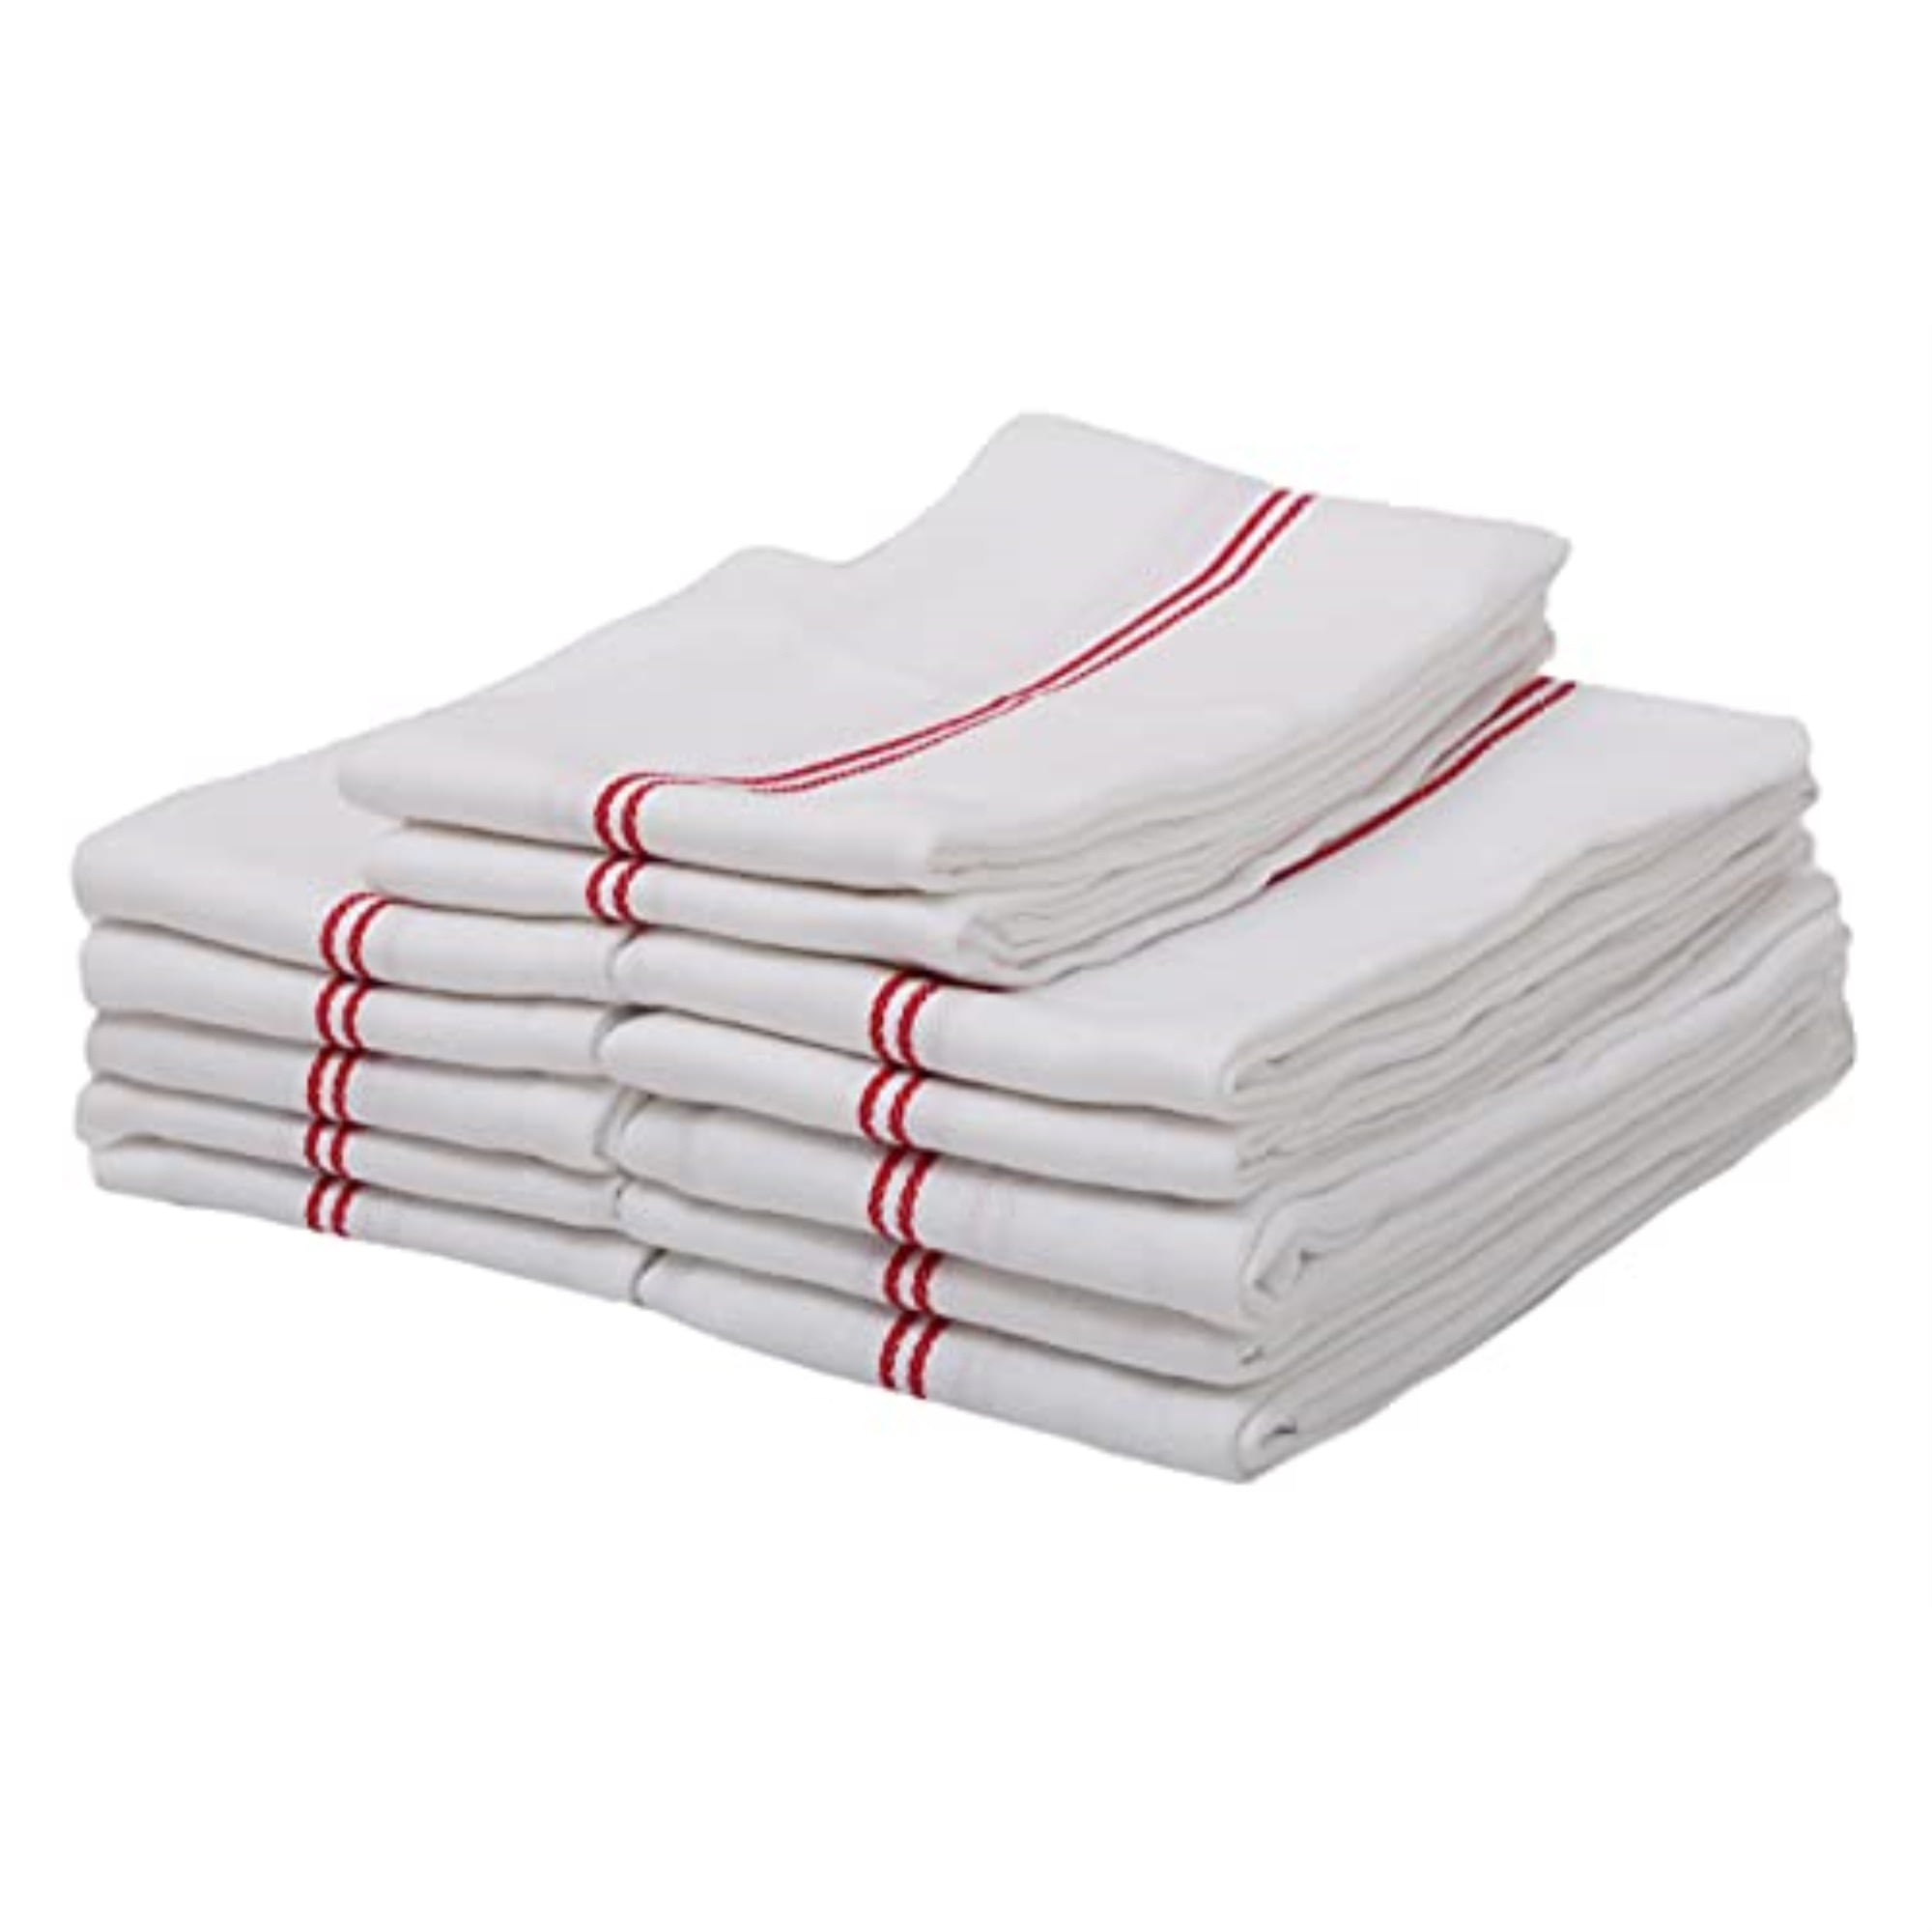 Keeble Outlets - Kitchen Towels, Set of 6, Yellow Stripes, Highly Absorbent  Dish Towels, Preferred by Chefs, 100% Cotton Hand Towels, Kitchen & Table  Linens, Flour Sack Towels, Dish Rags